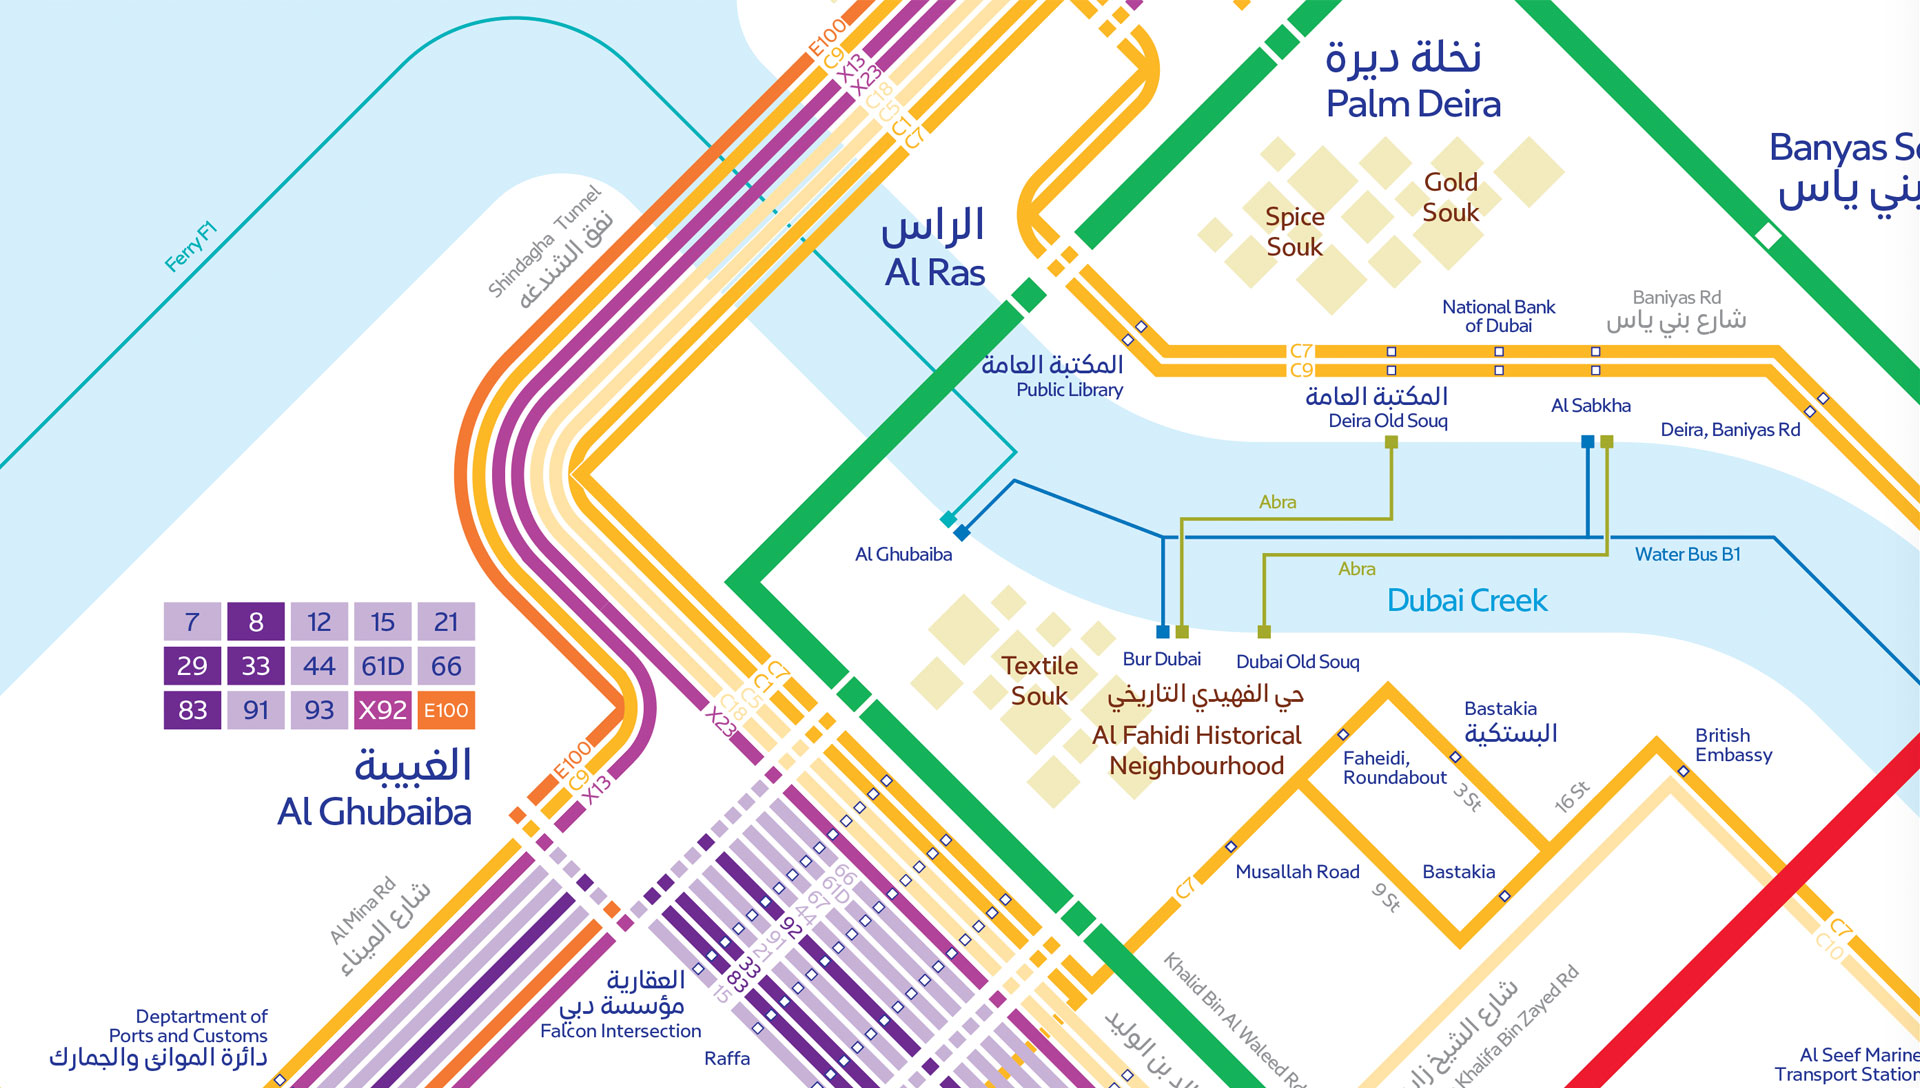 and so we design RTA Project map